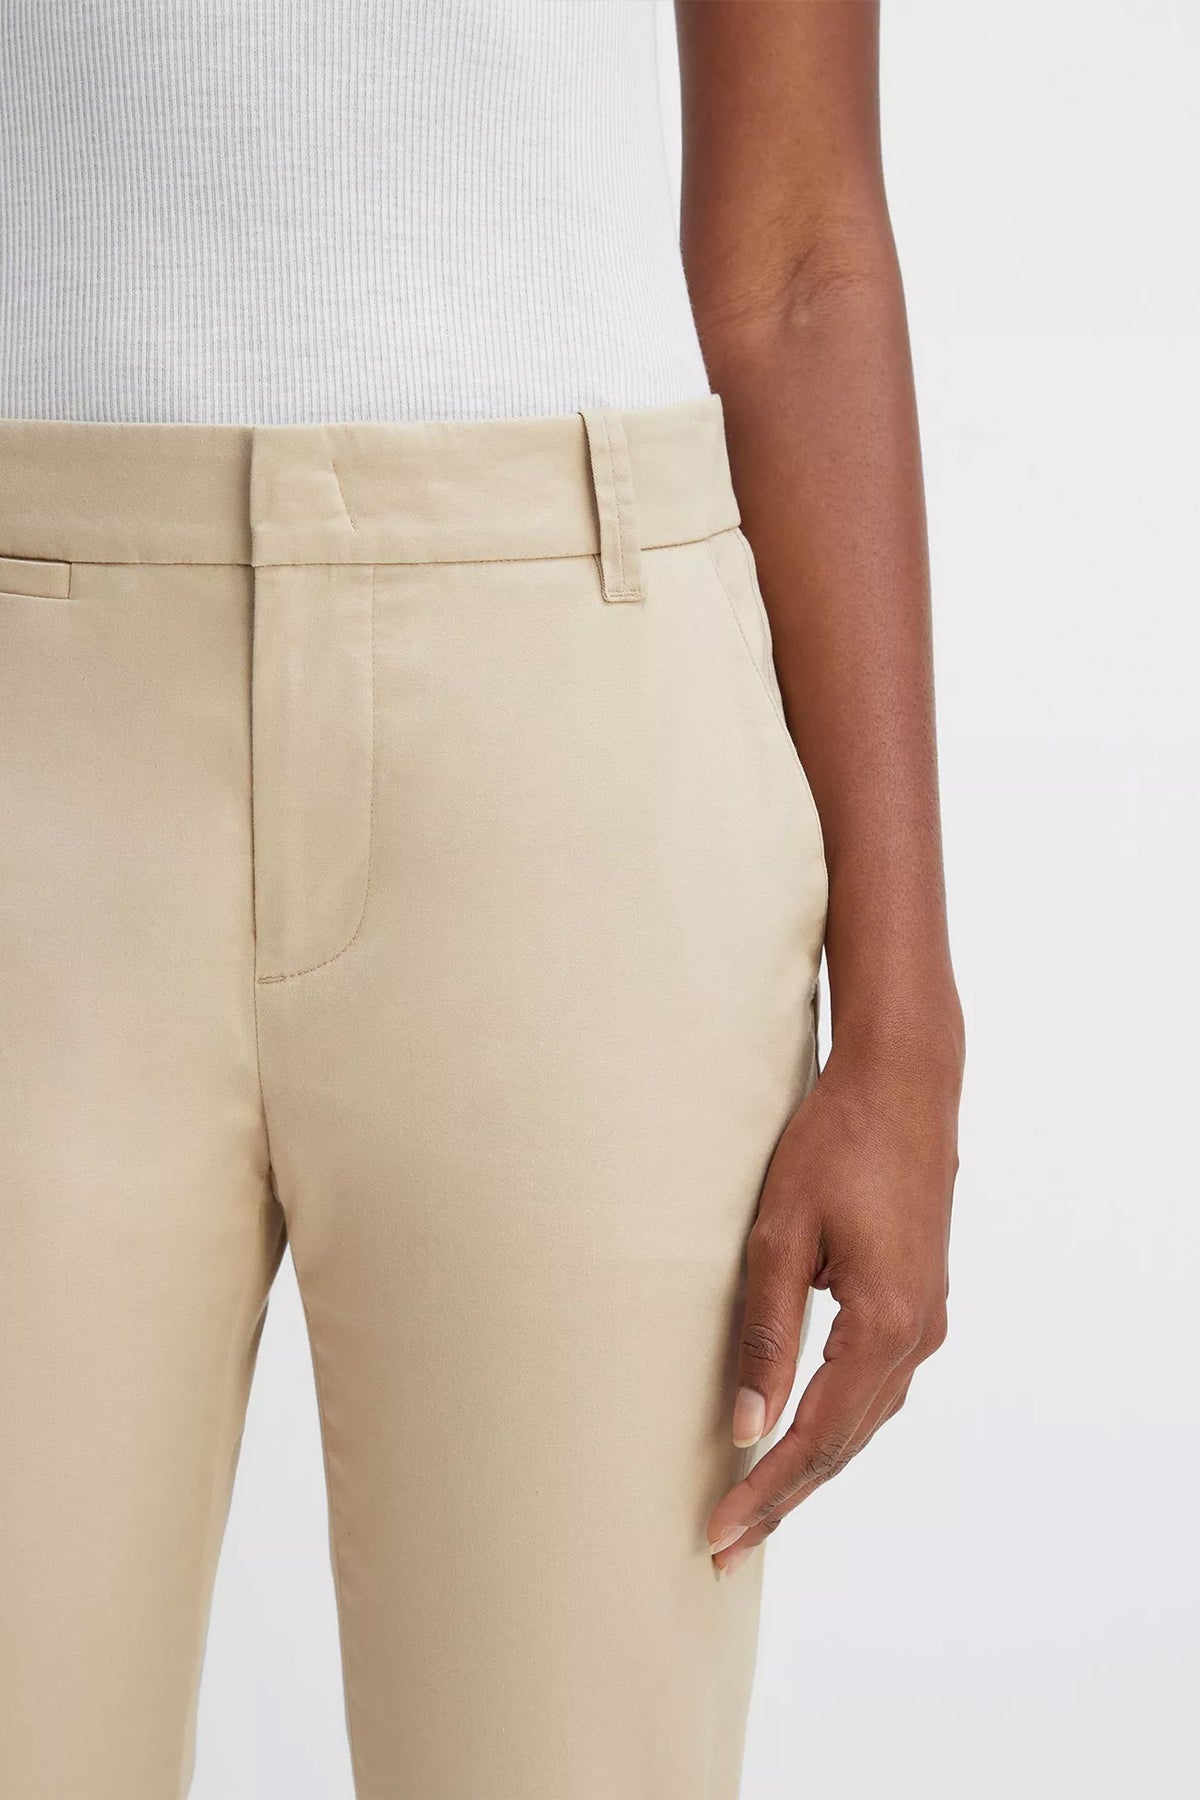 Coin Pocket Chino in Latte - shop-olivia.com